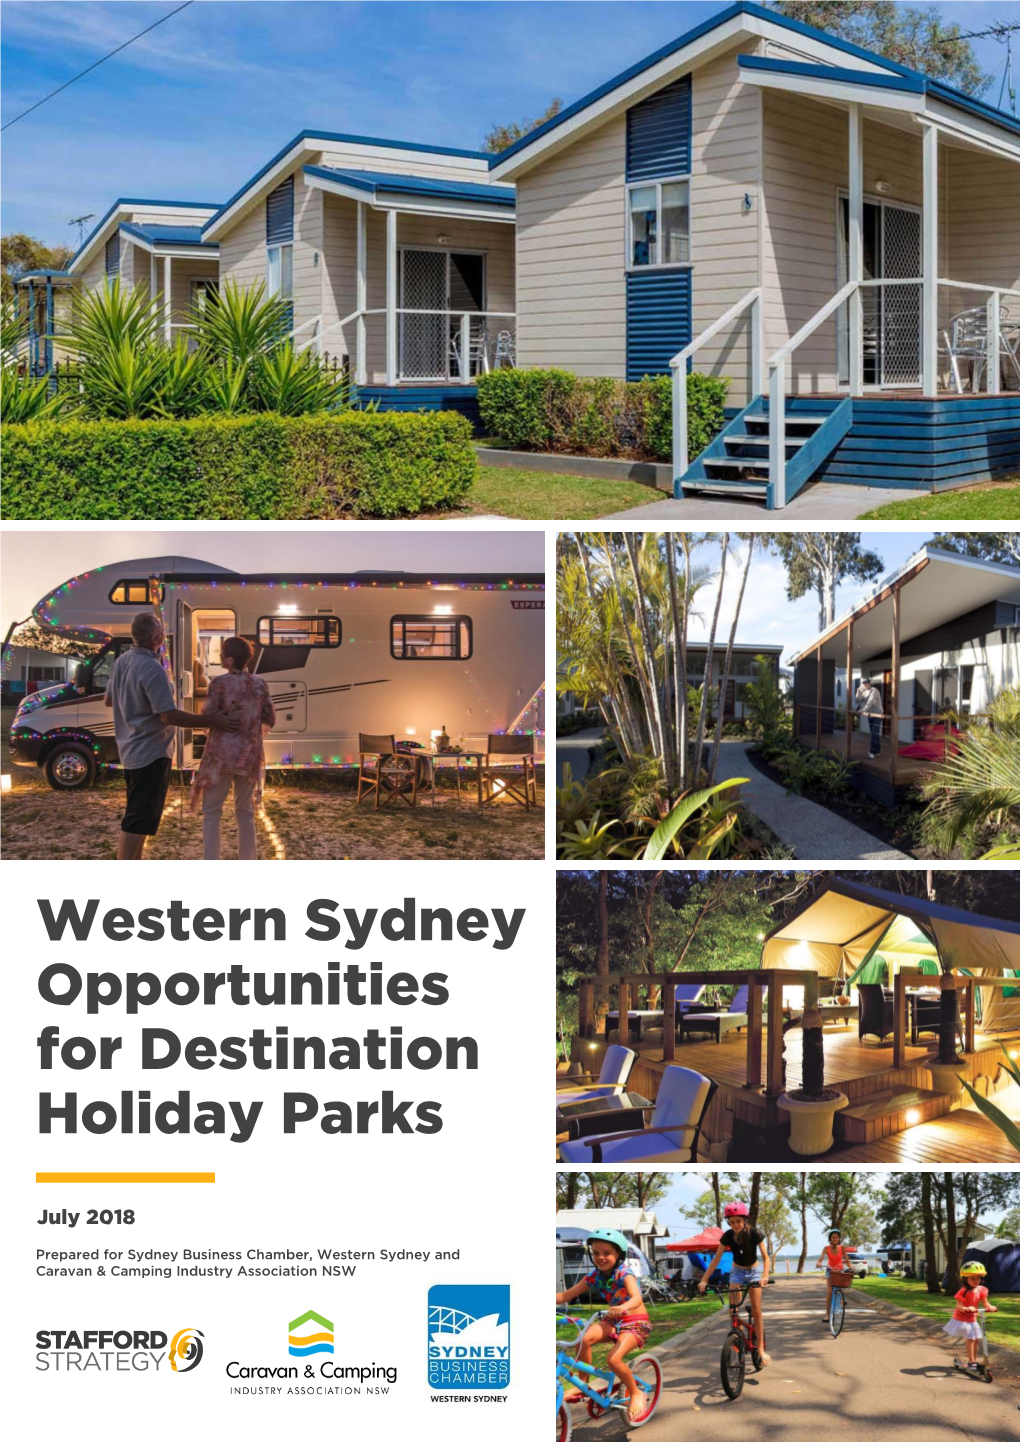 Western Sydney Opportunities for Destination Holiday Parks